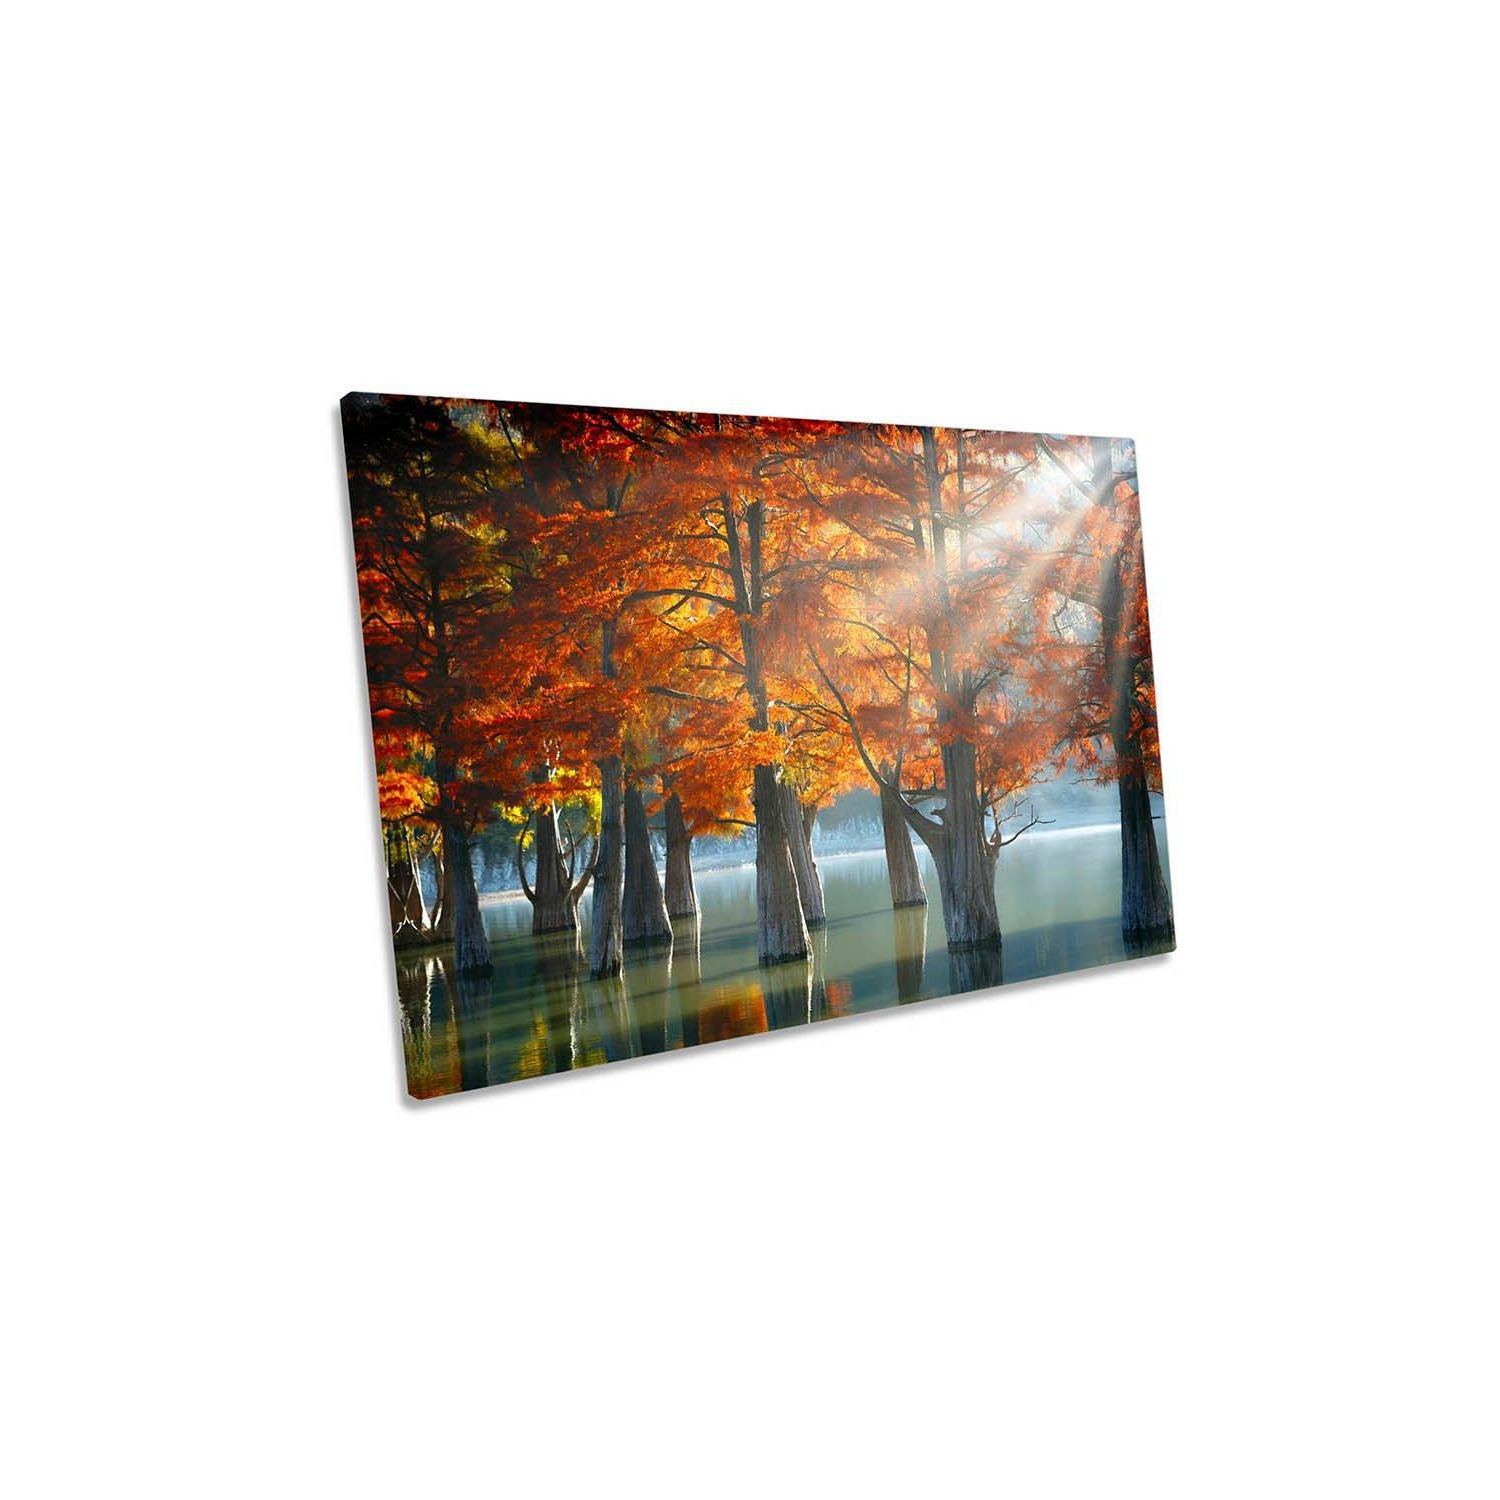 Sunny Orange Cypress Trees Lake Landscape Canvas Wall Art Picture Print - image 1